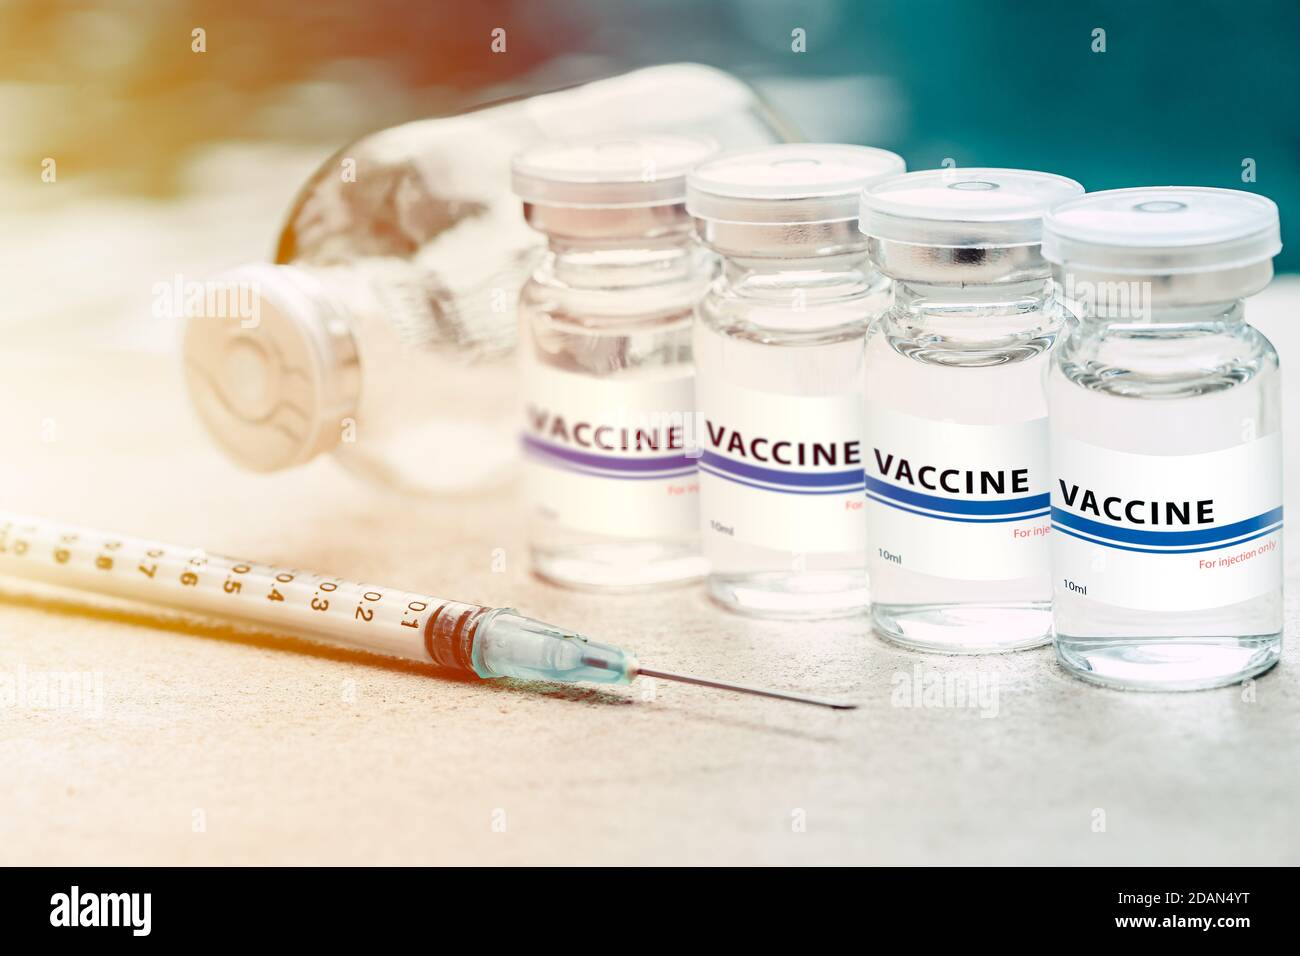 Vaccine dose with syringe needle medical injection for RSV and Corona virus medicine concept. Stock Photo